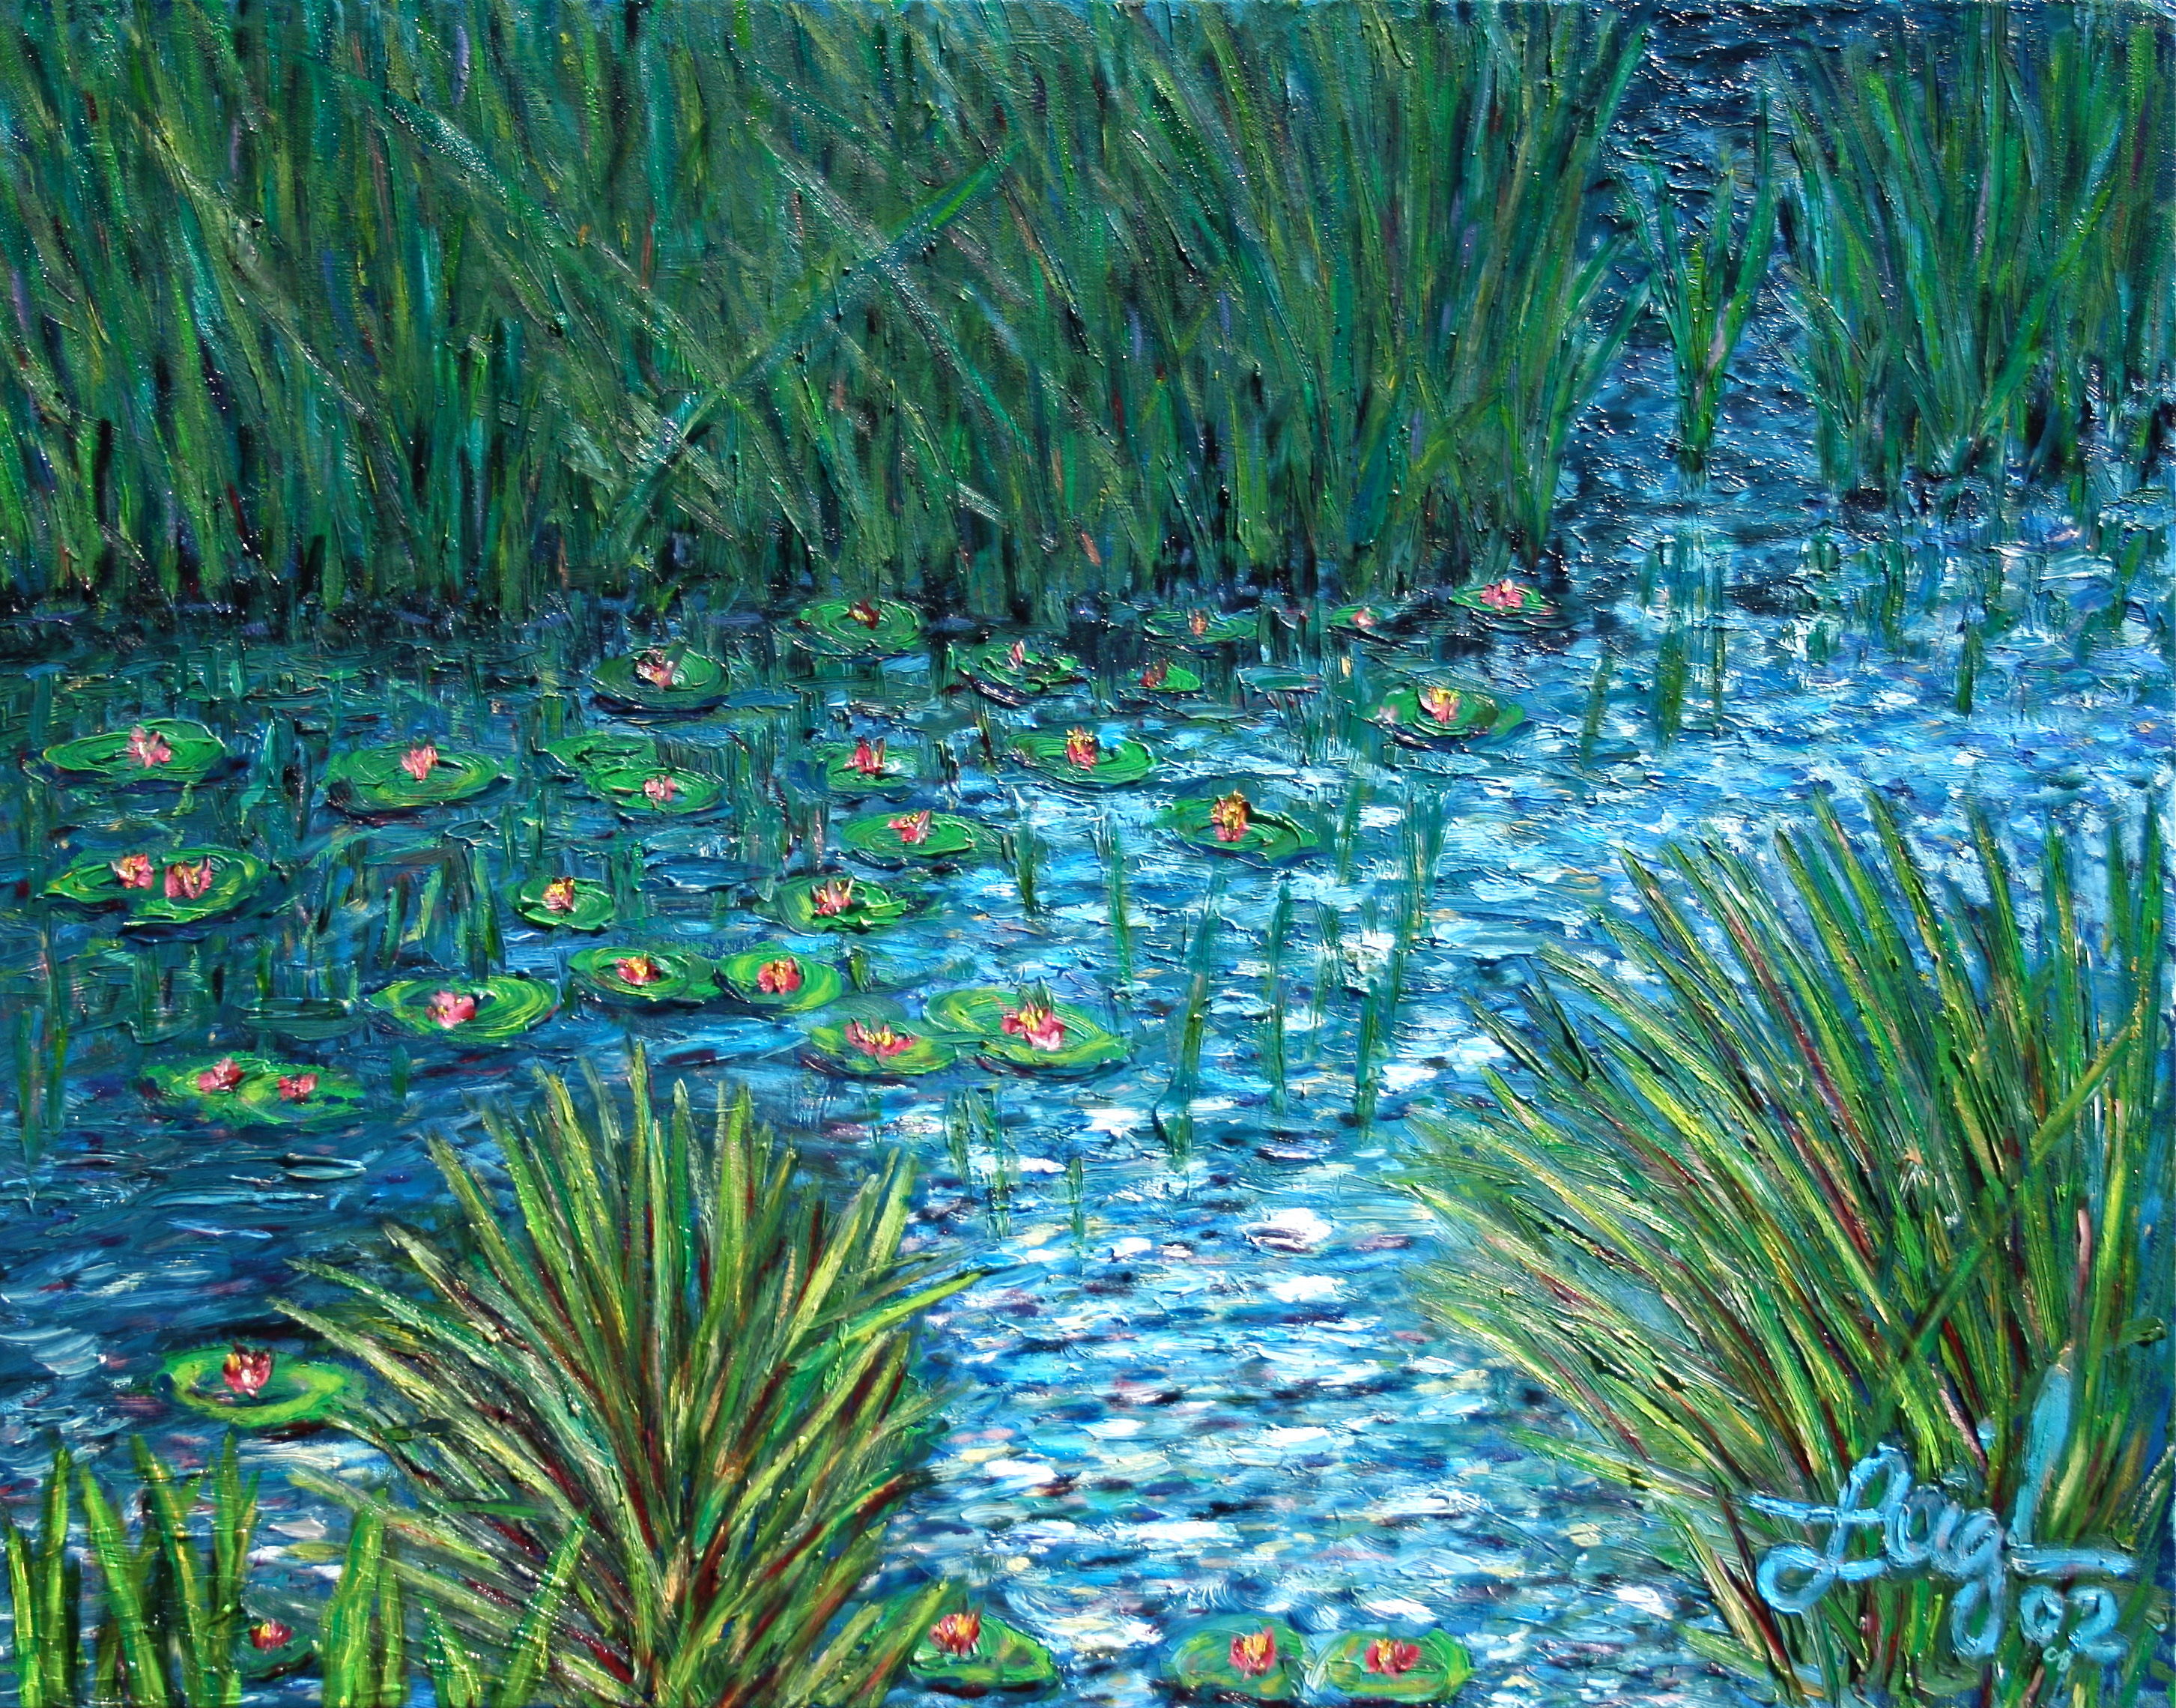 Water lilies  ~  
Neil Cohn, Chicago, IL
2002 (revised 2008)   •  22 x 28